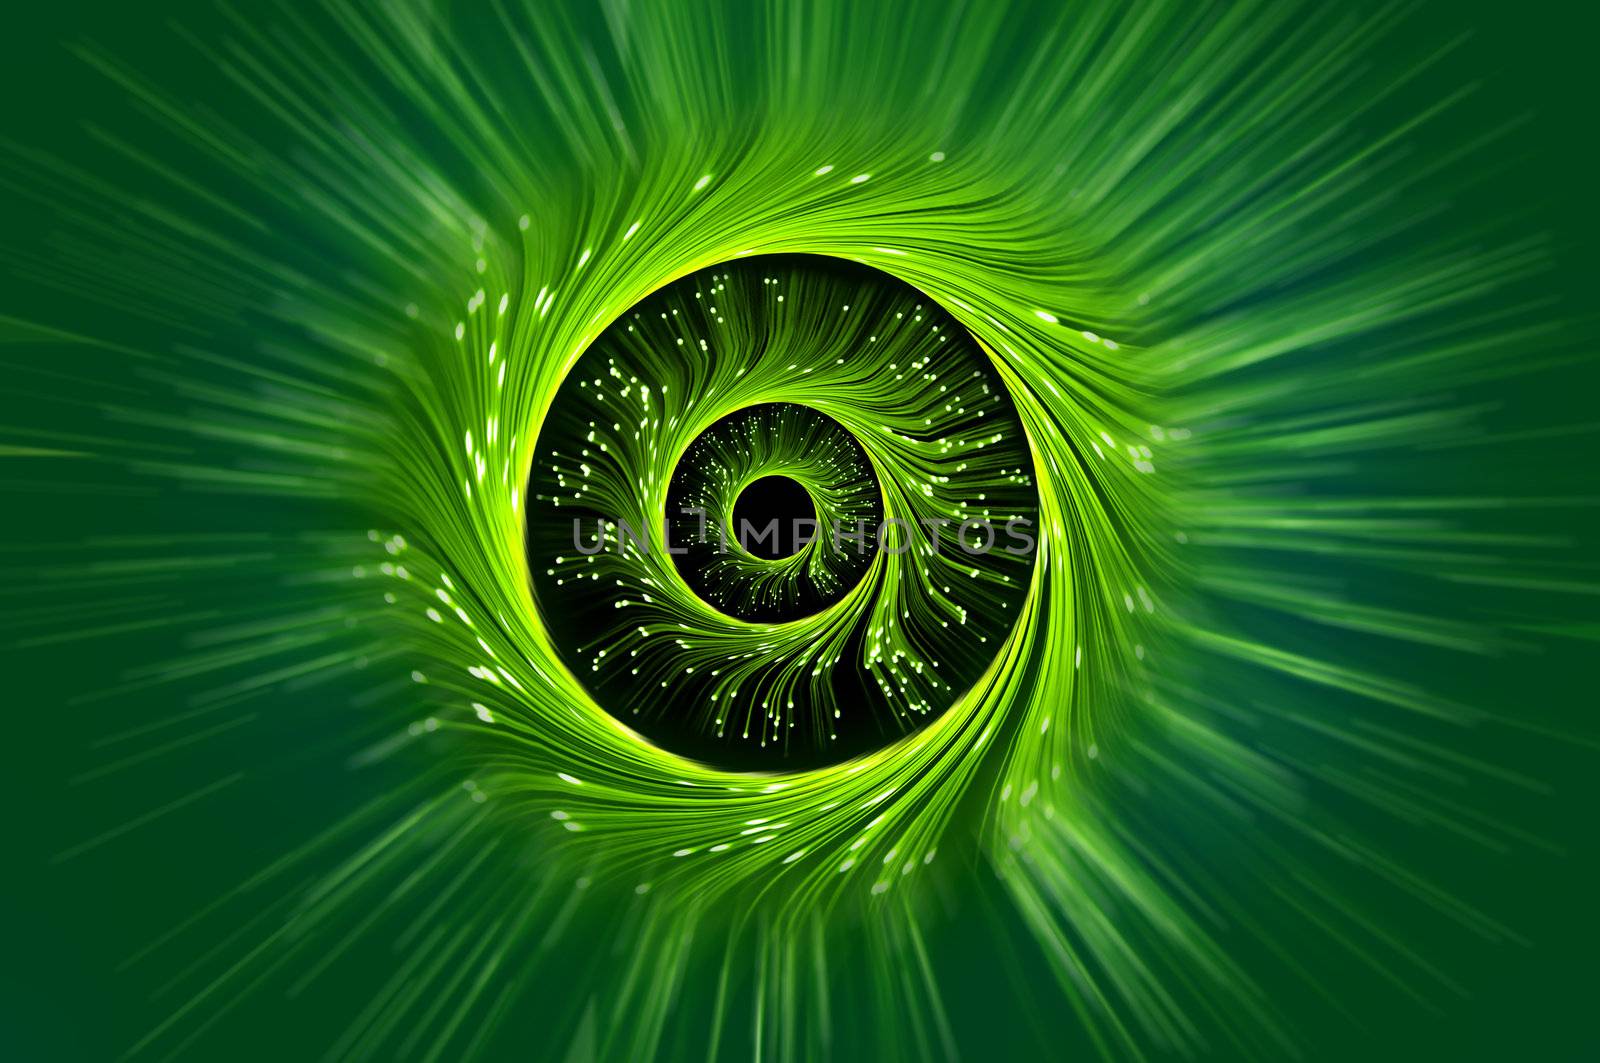 Abstract style rings of green and yellow fiber optic light strands towards centre of image with motion blur effect to the outer portion